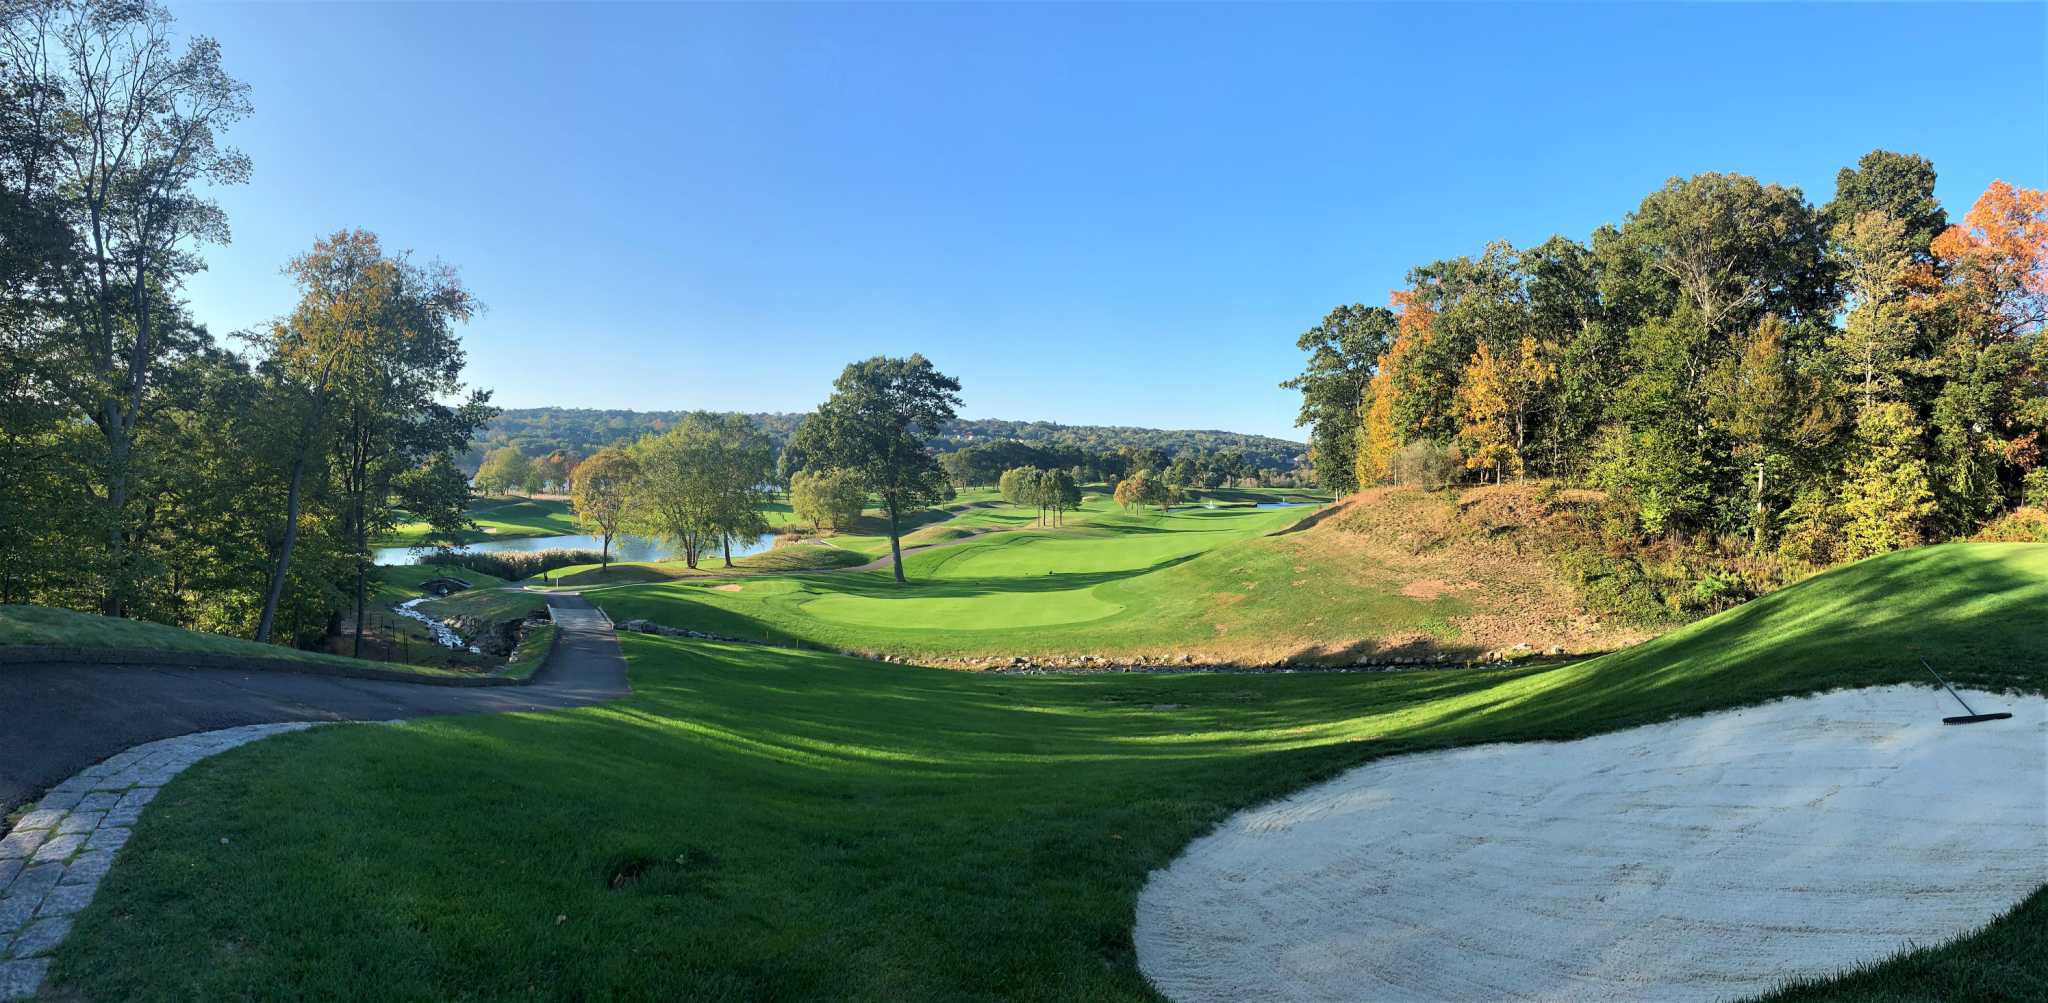 Milfords Great River Golf Club to host New England Amateur